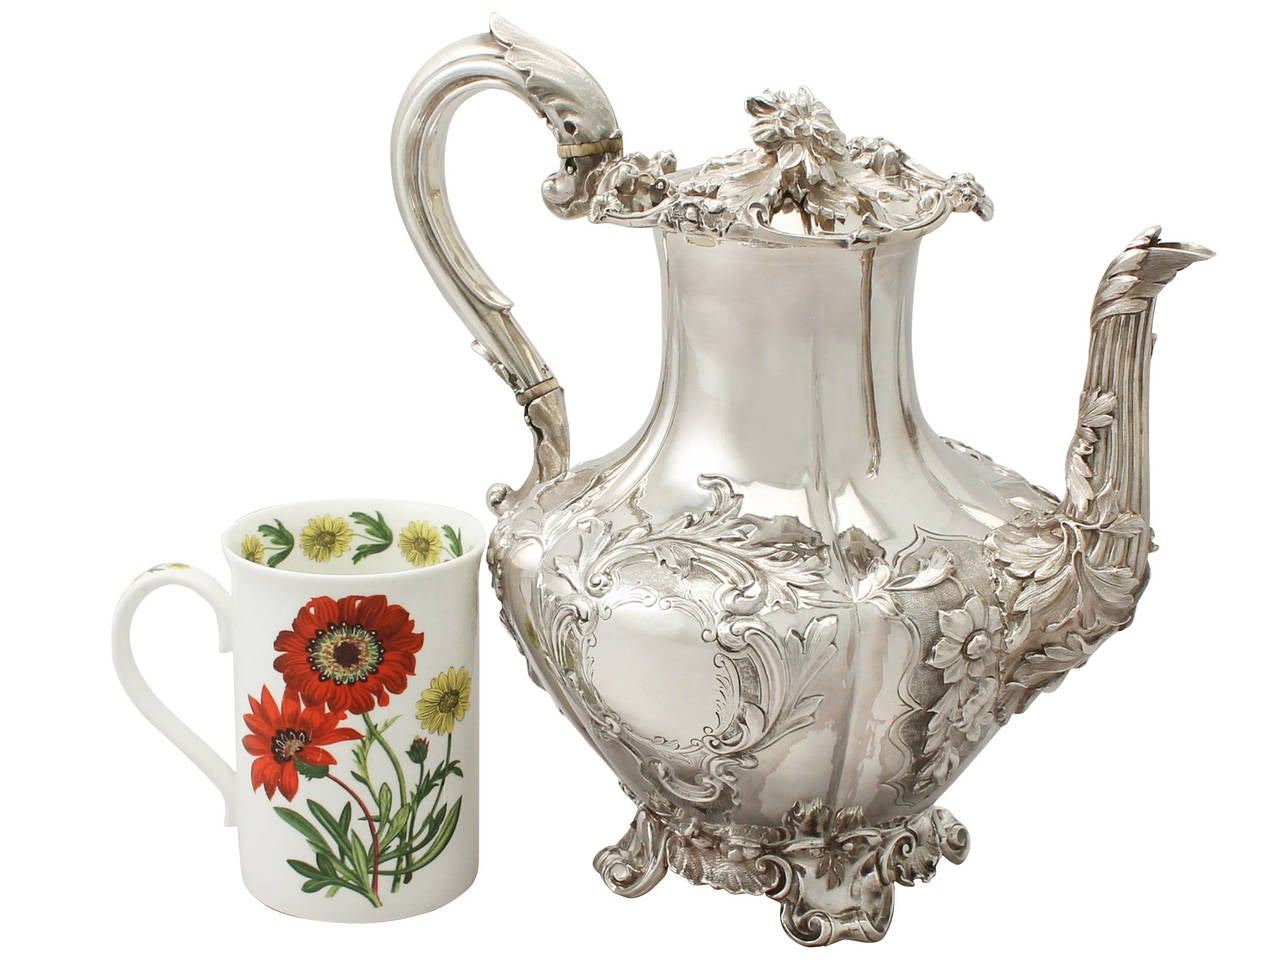 An exceptional, fine and impressive antique Victorian English sterling silver coffee pot; an addition to our silver teaware collection.
This exceptional antique Victorian sterling silver coffee pot has a baluster, melon shaped form onto four